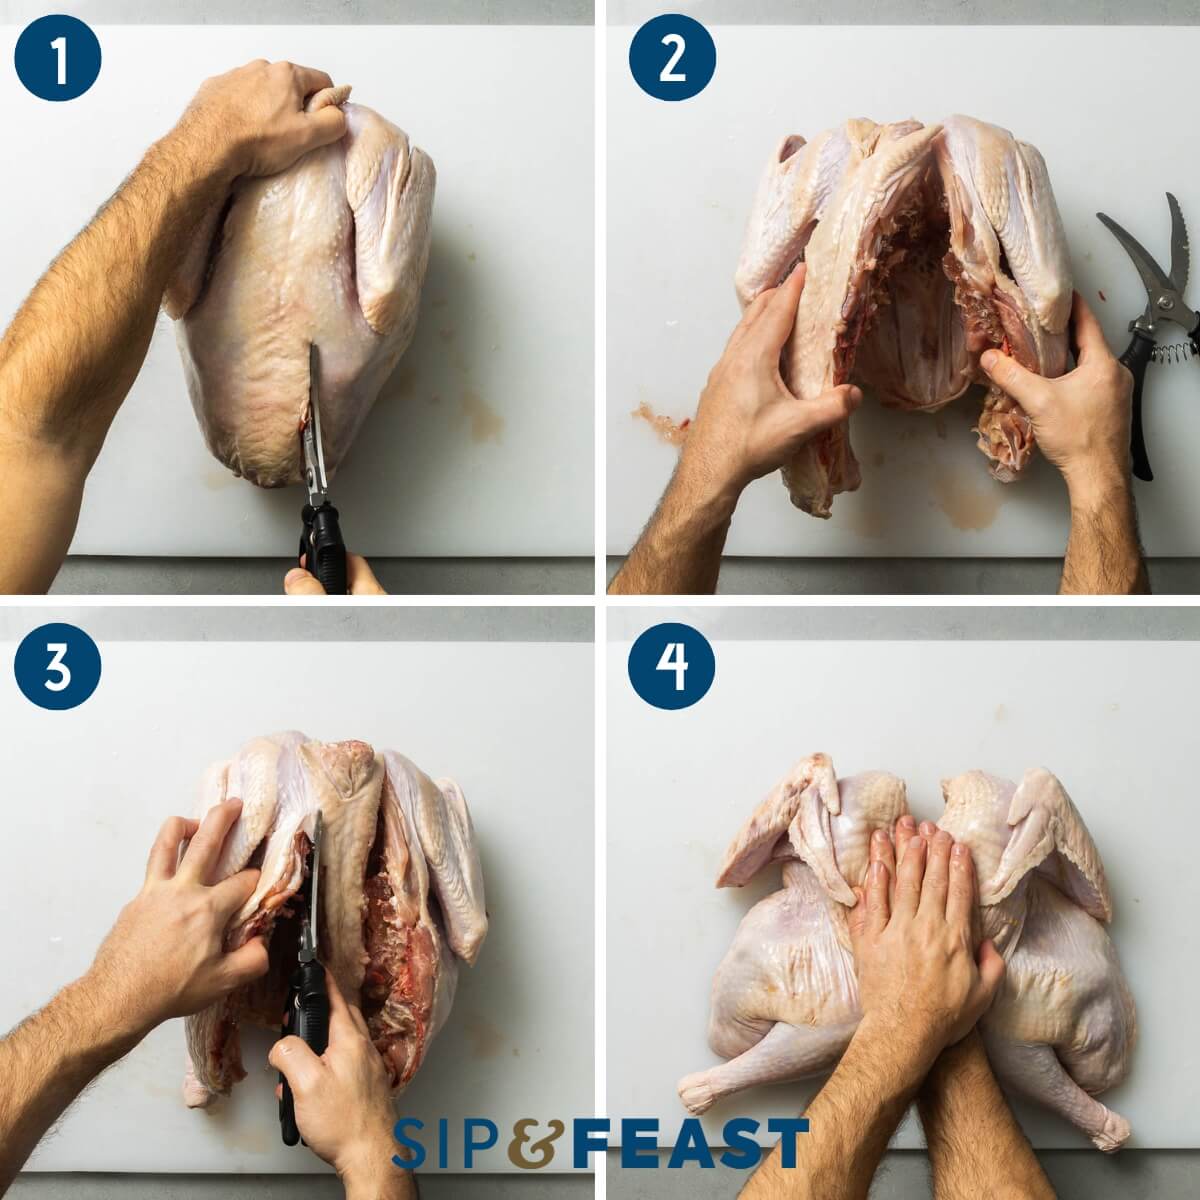 Spatchcock turkey recipe process collage number one showing cutting out backbone of turkey and flattening it on cutting board.